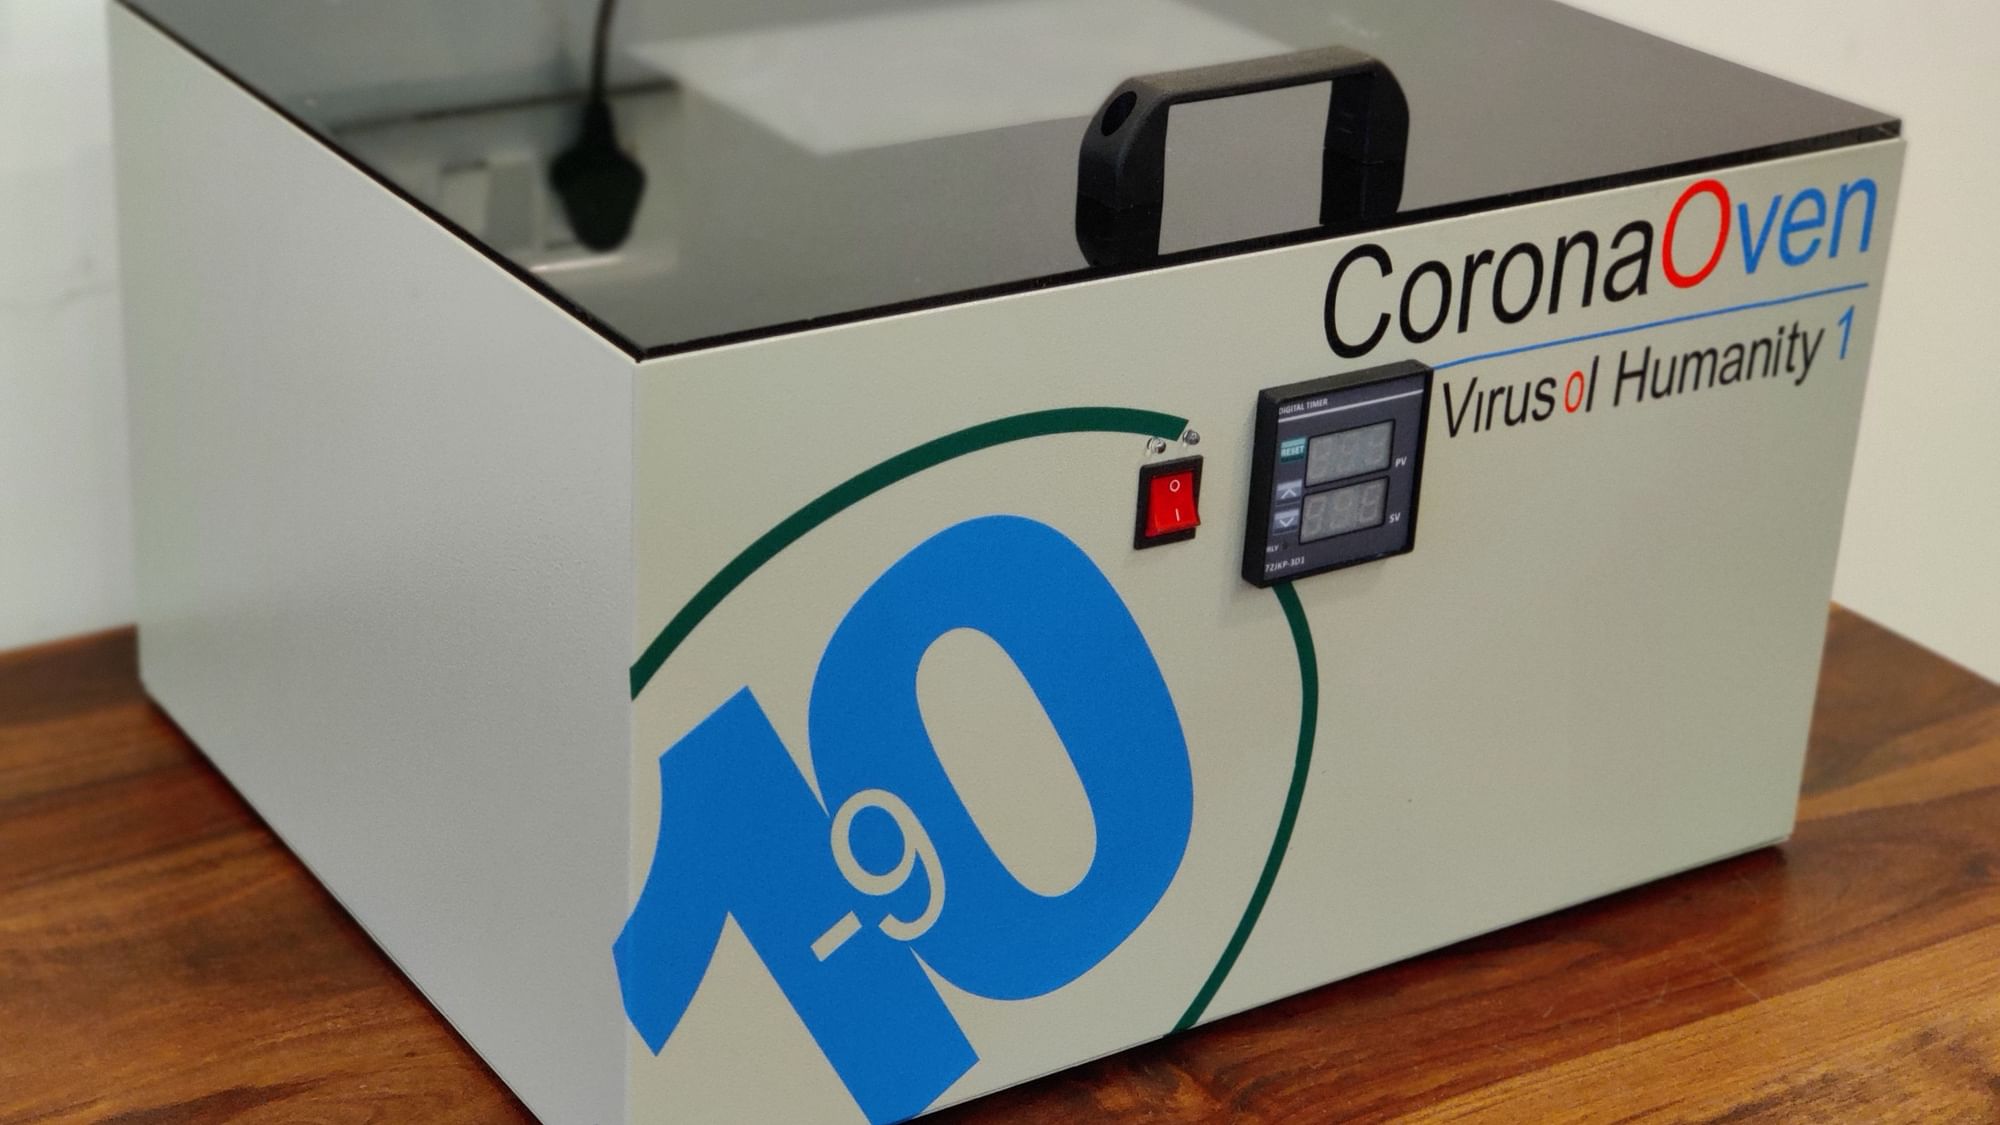 This "Corona Oven" uses UV-C light to disinfect goods in 10 minutes time.&nbsp;